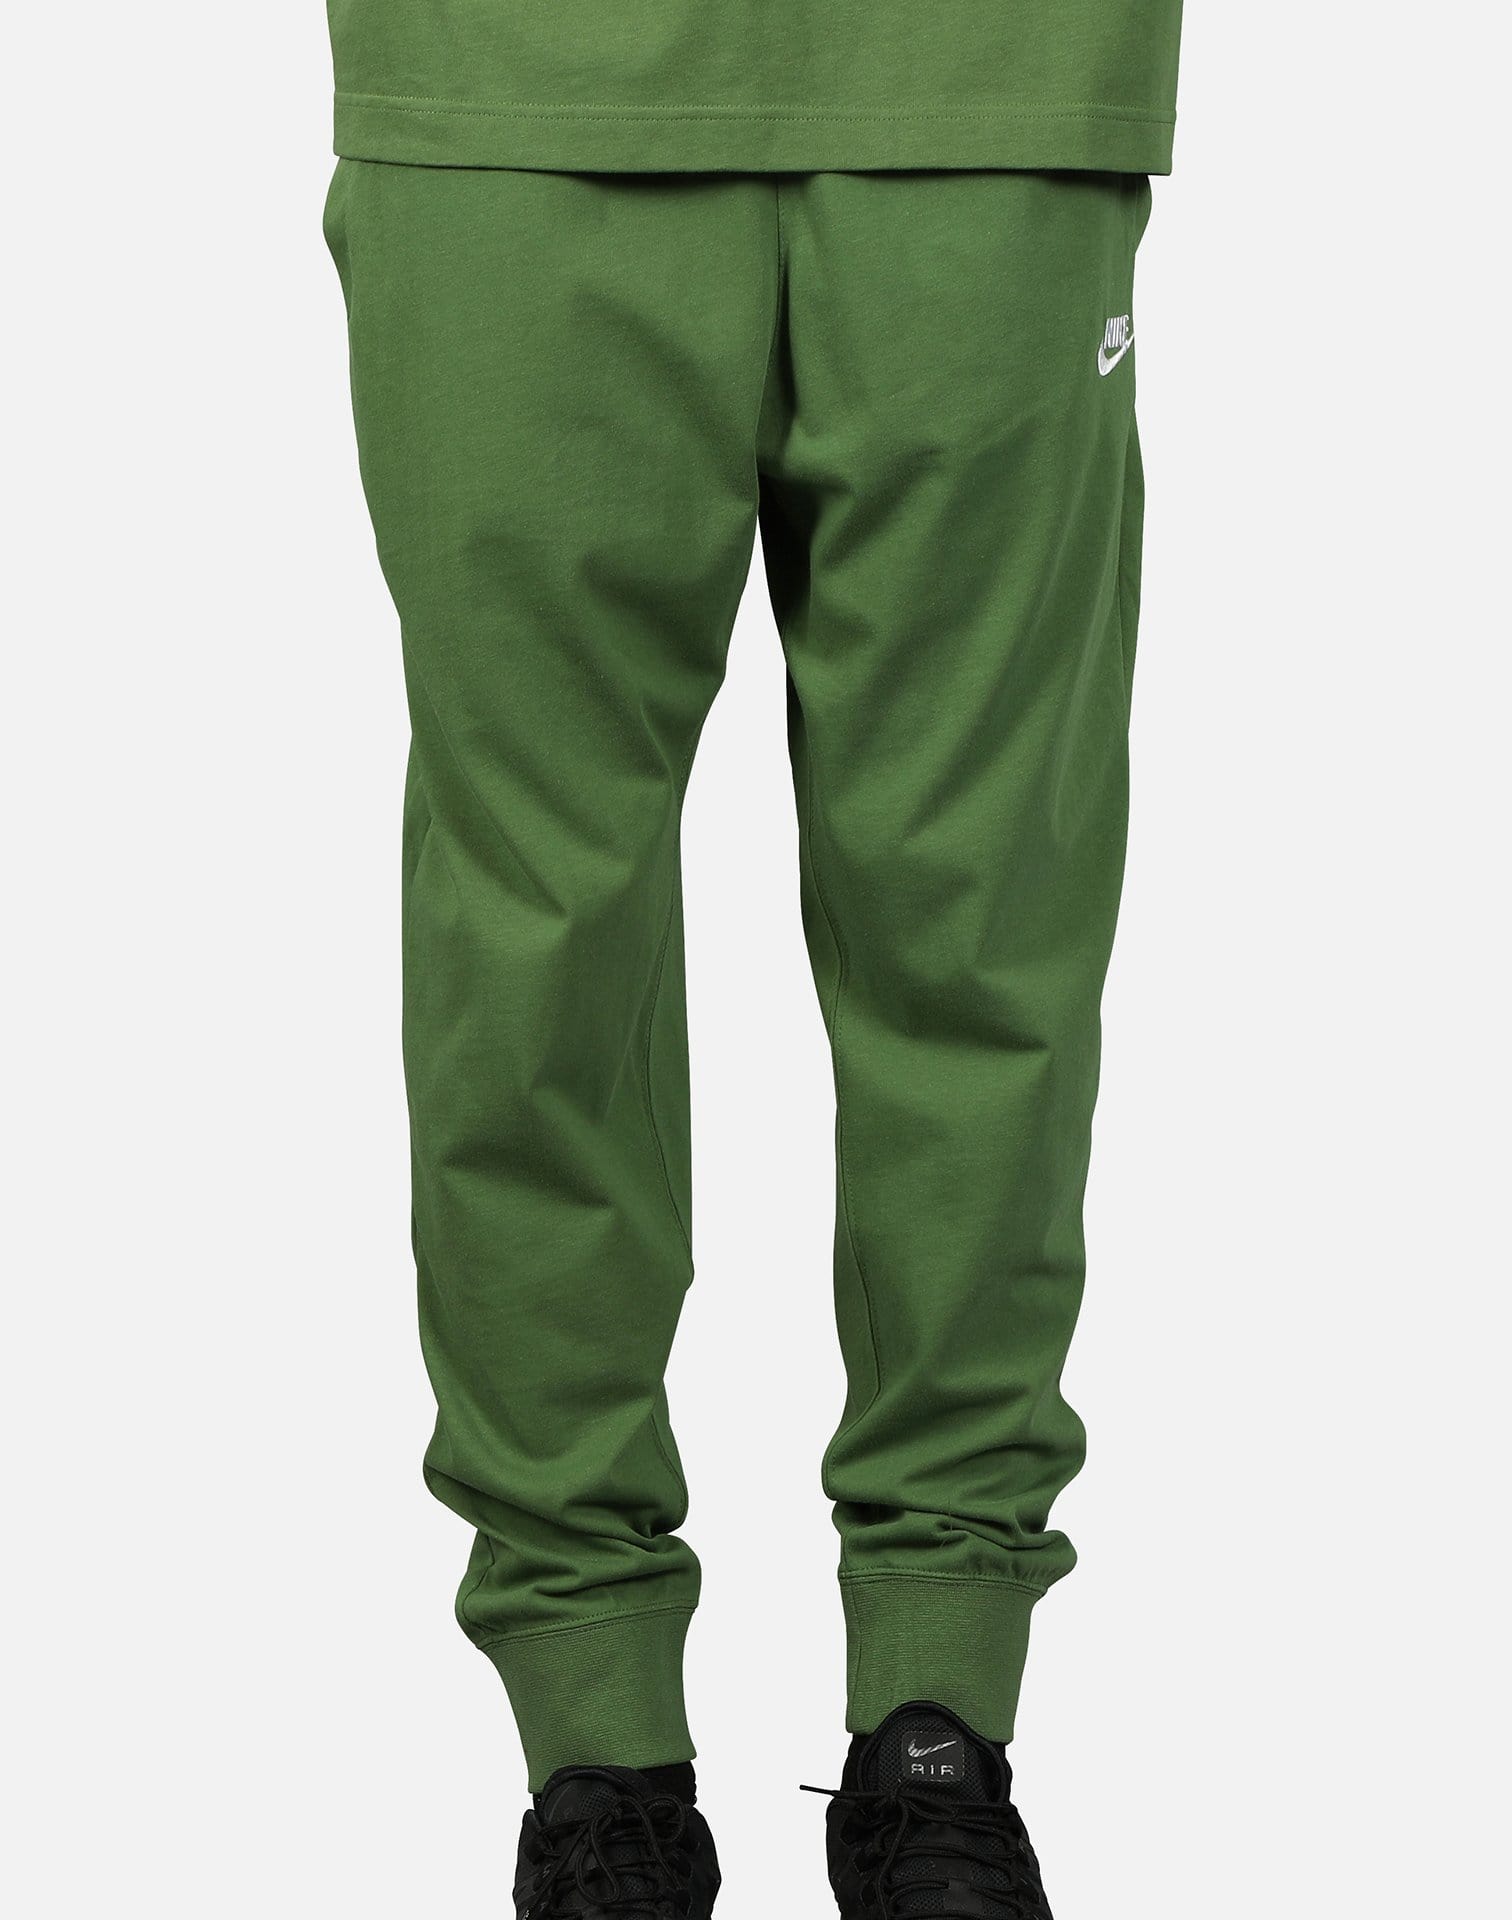 NSW CLUB JOGGER PANTS – DTLR